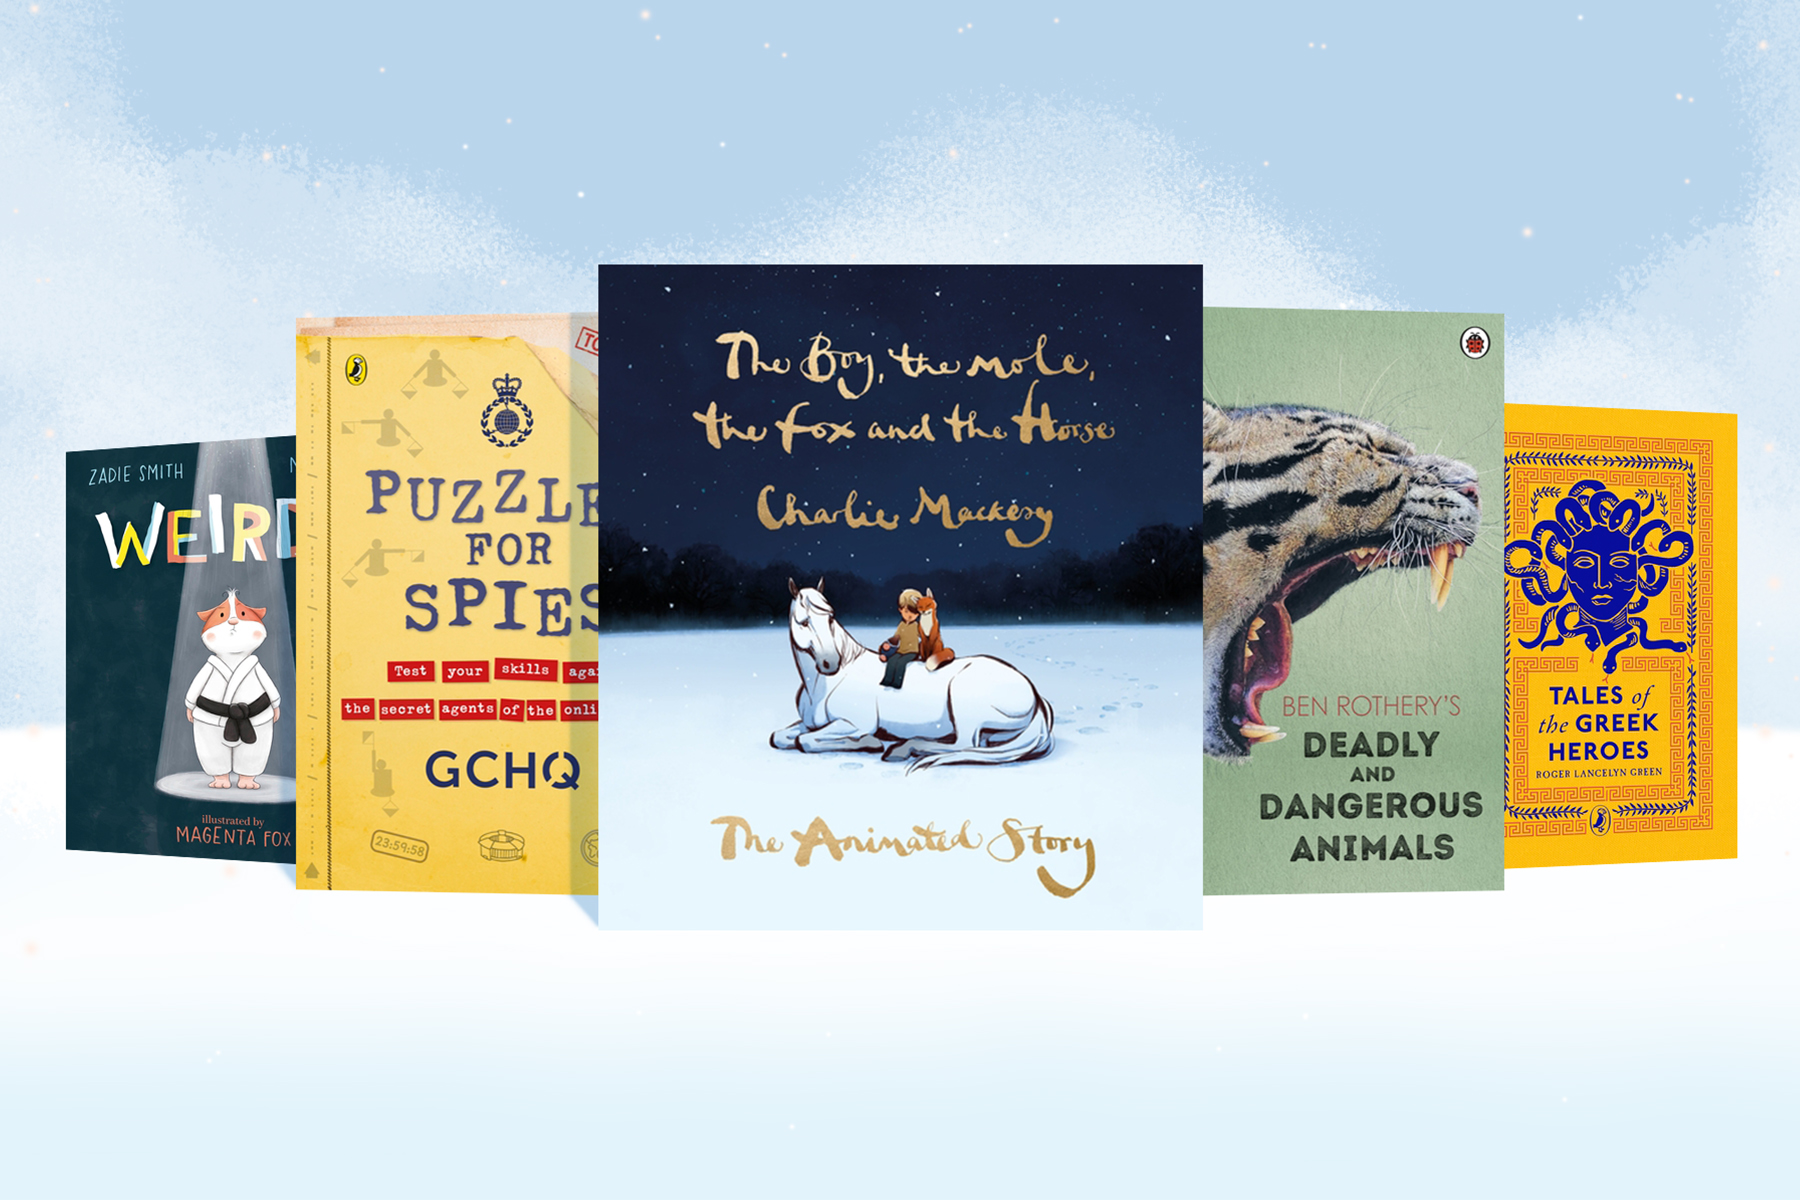 A selection of books against a wintry background